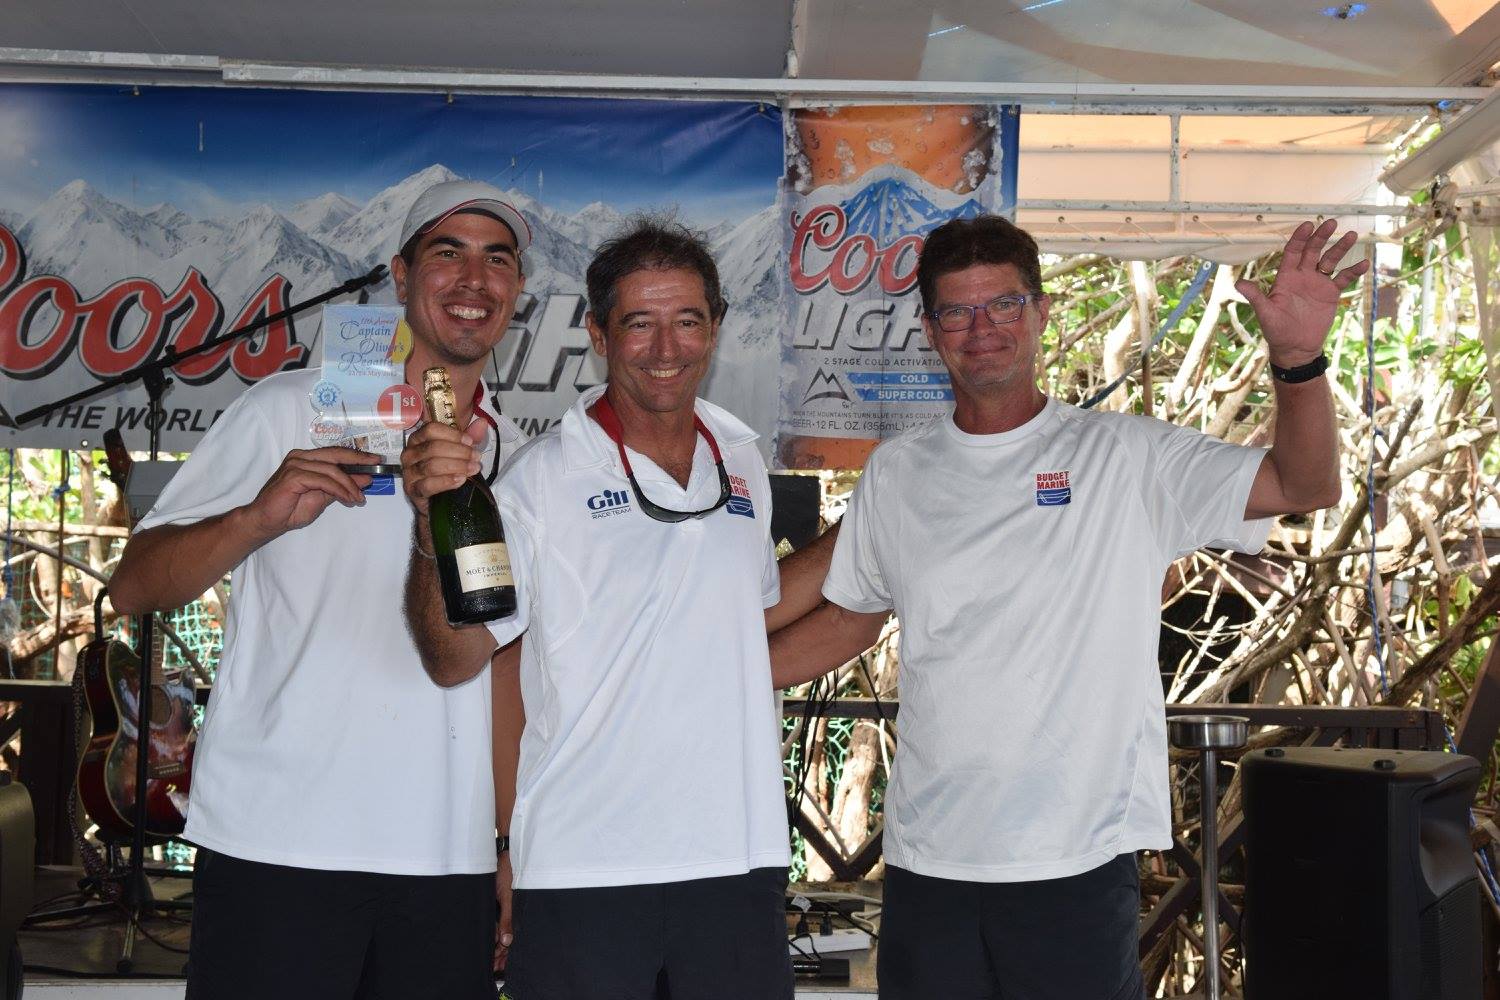 Budget Marine / Gill's third win of the season at the Captain Oliver's Regatta 1